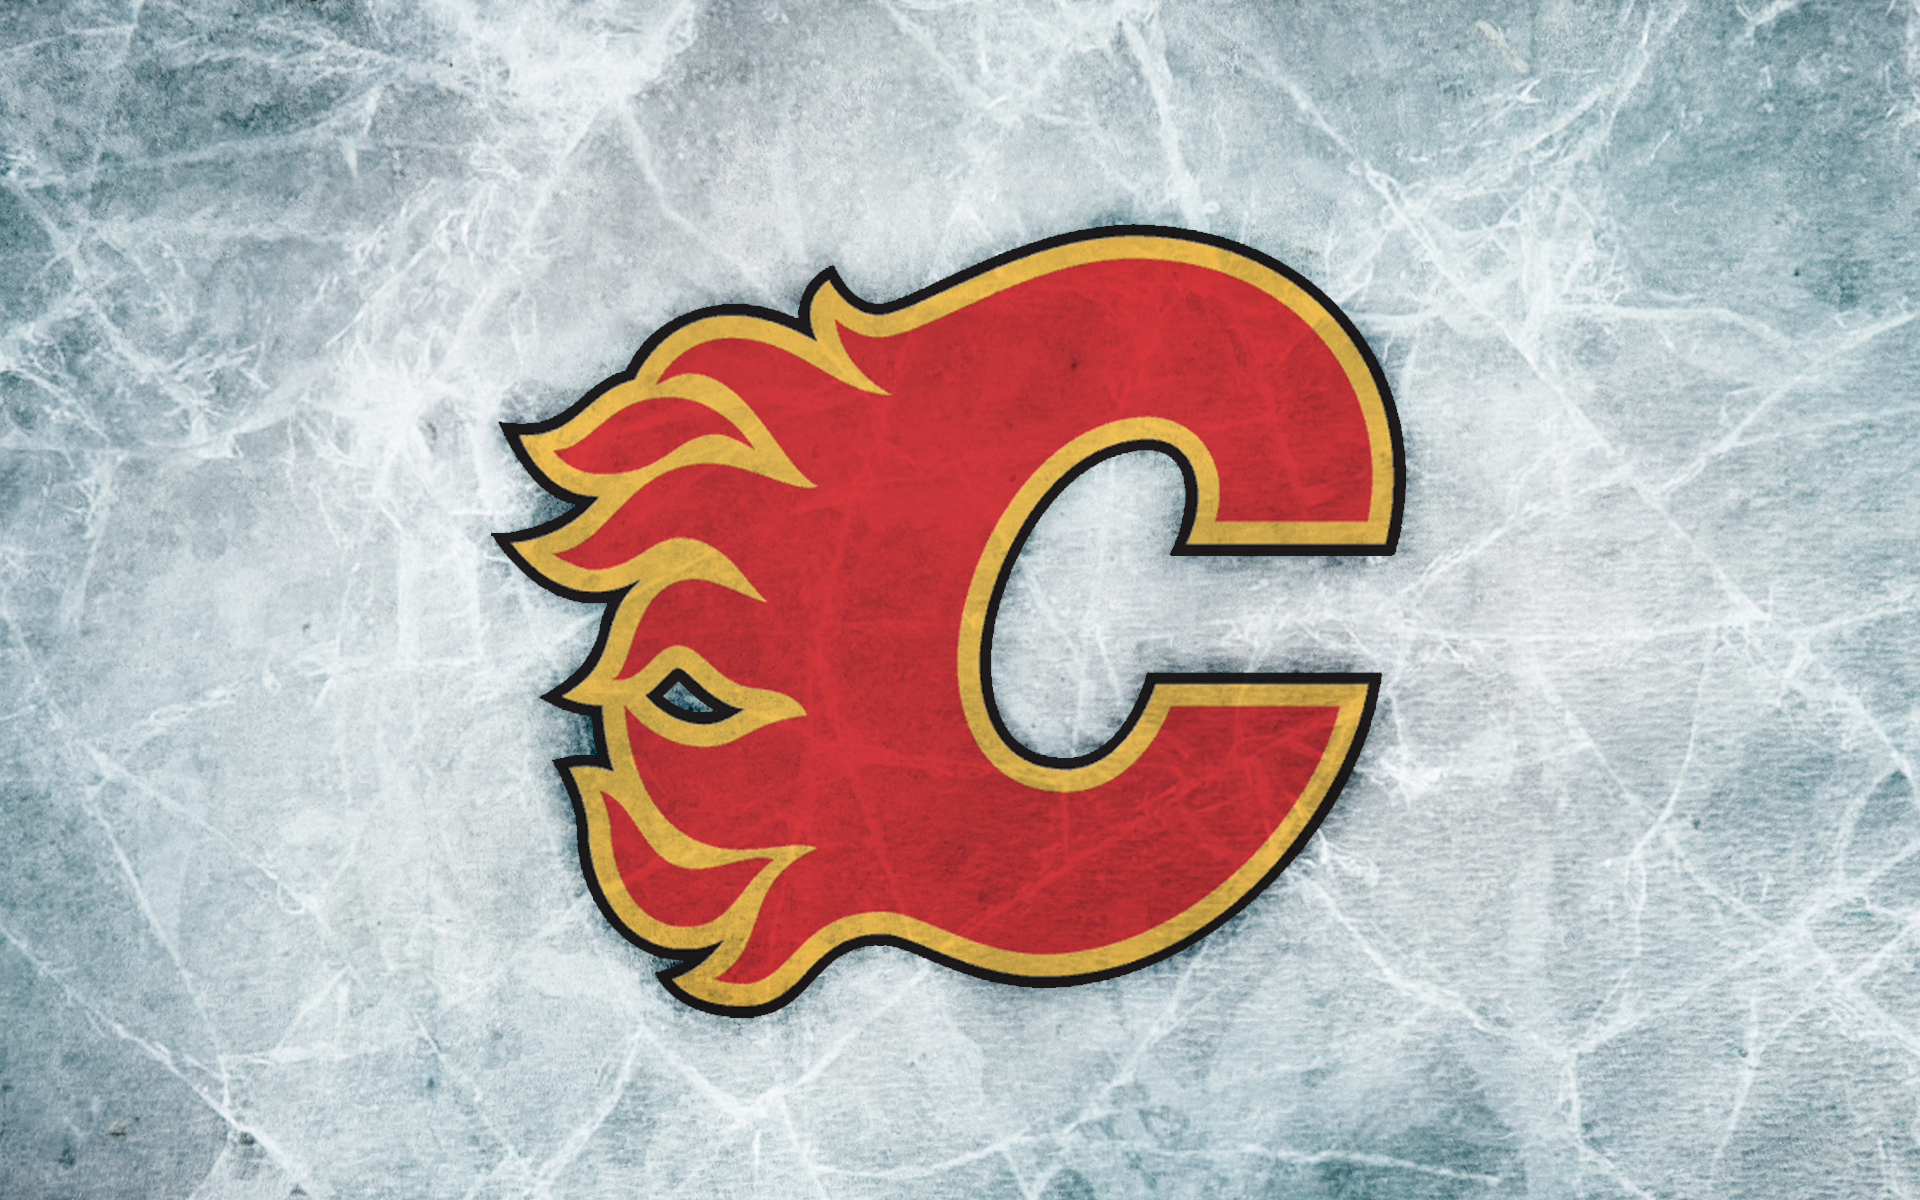 Calgary Flames Wallpaper HD Full HD Pictures